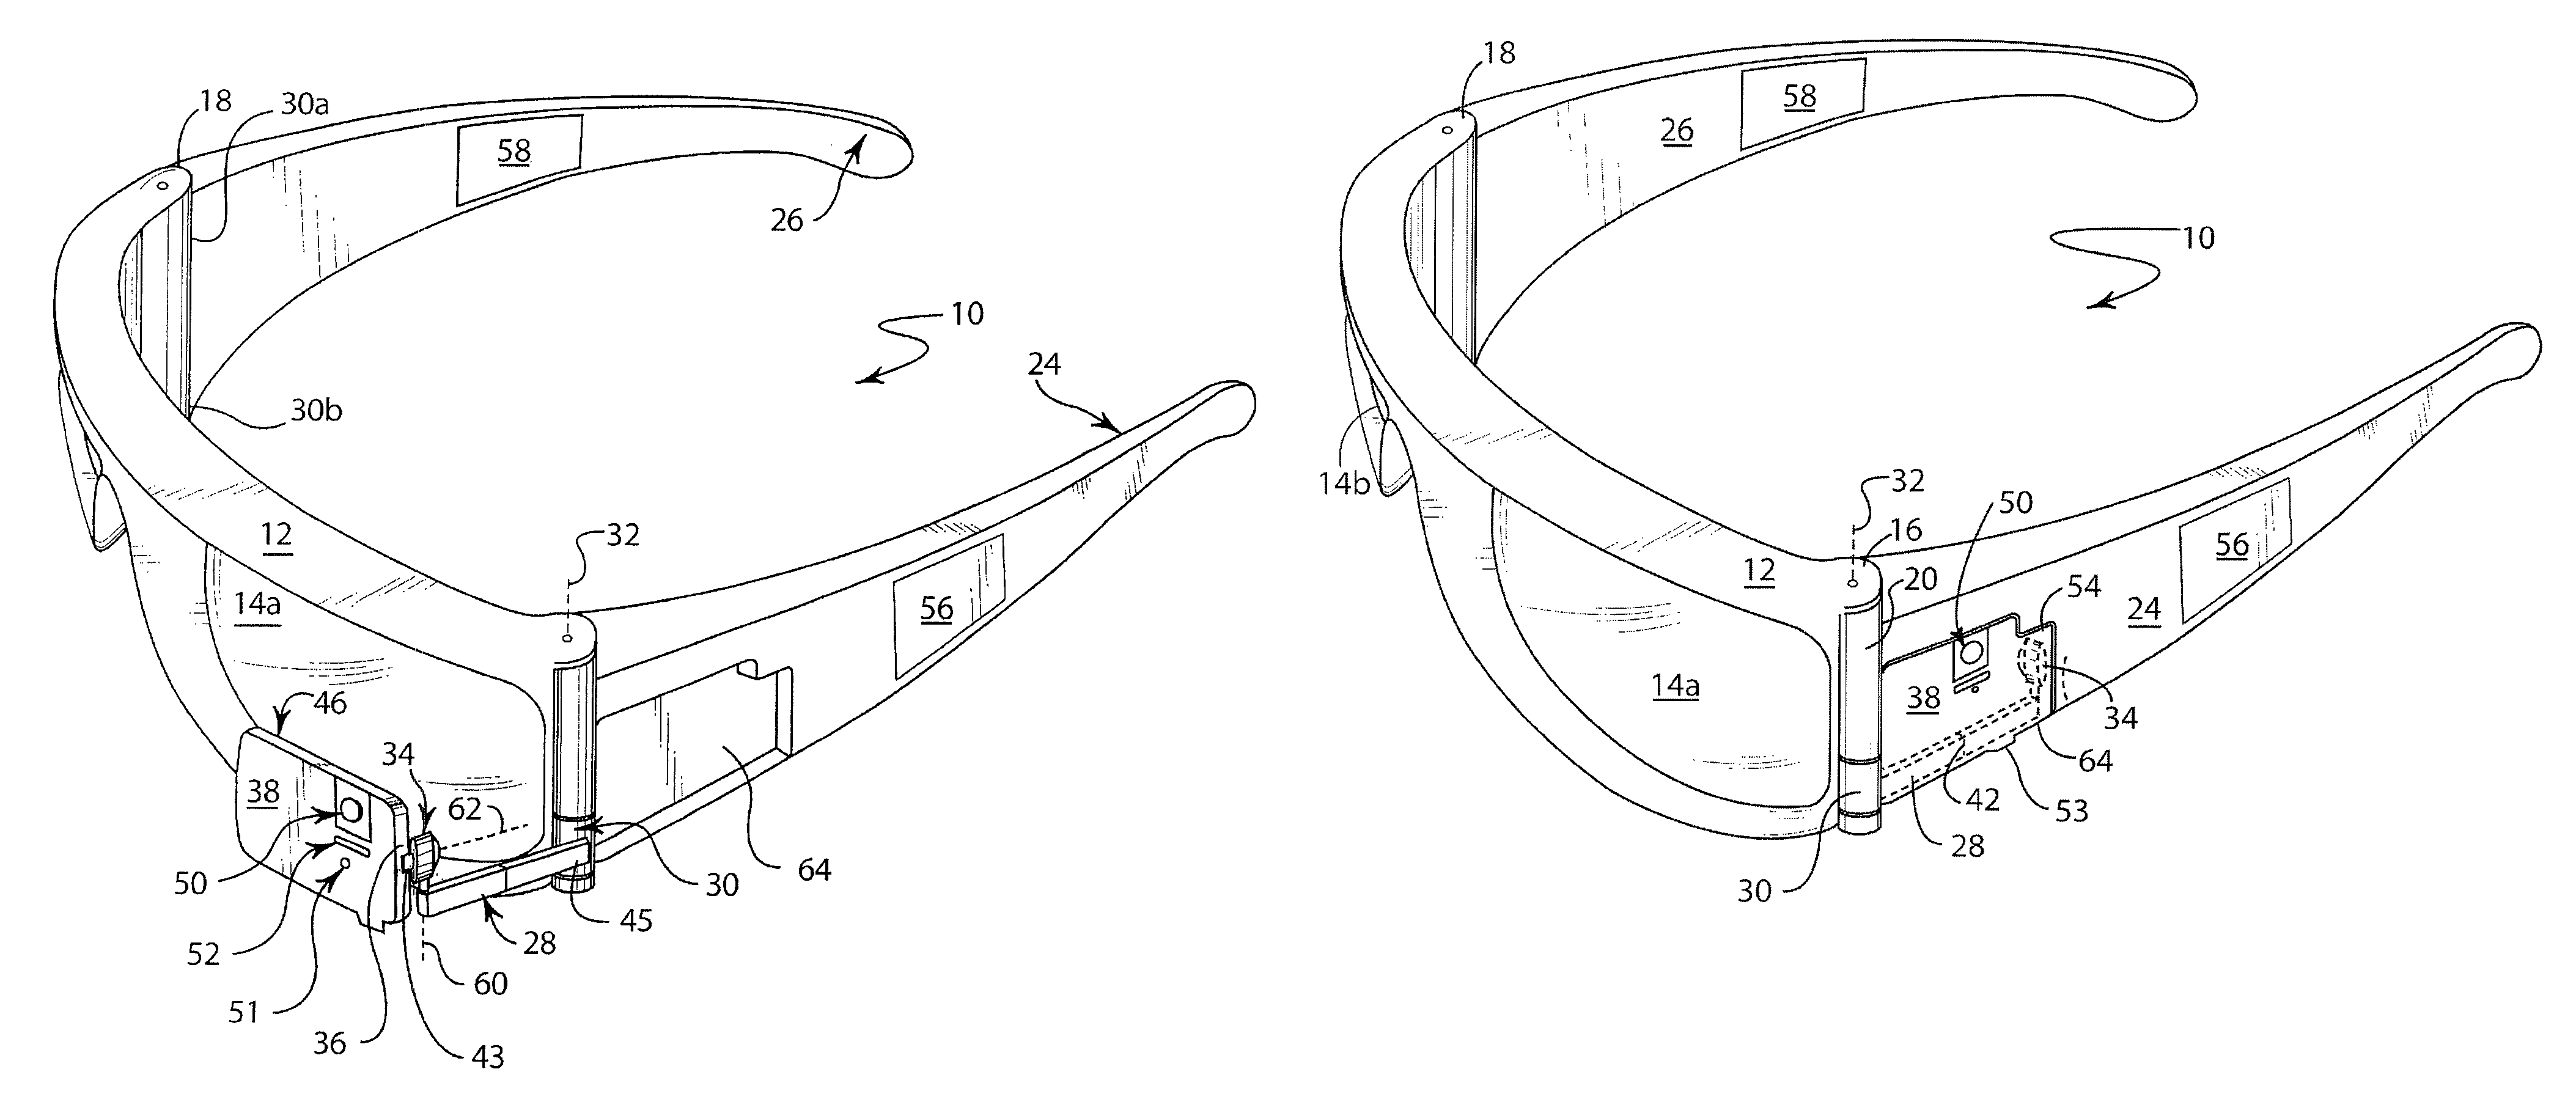 Eyeglasses with integrated video display